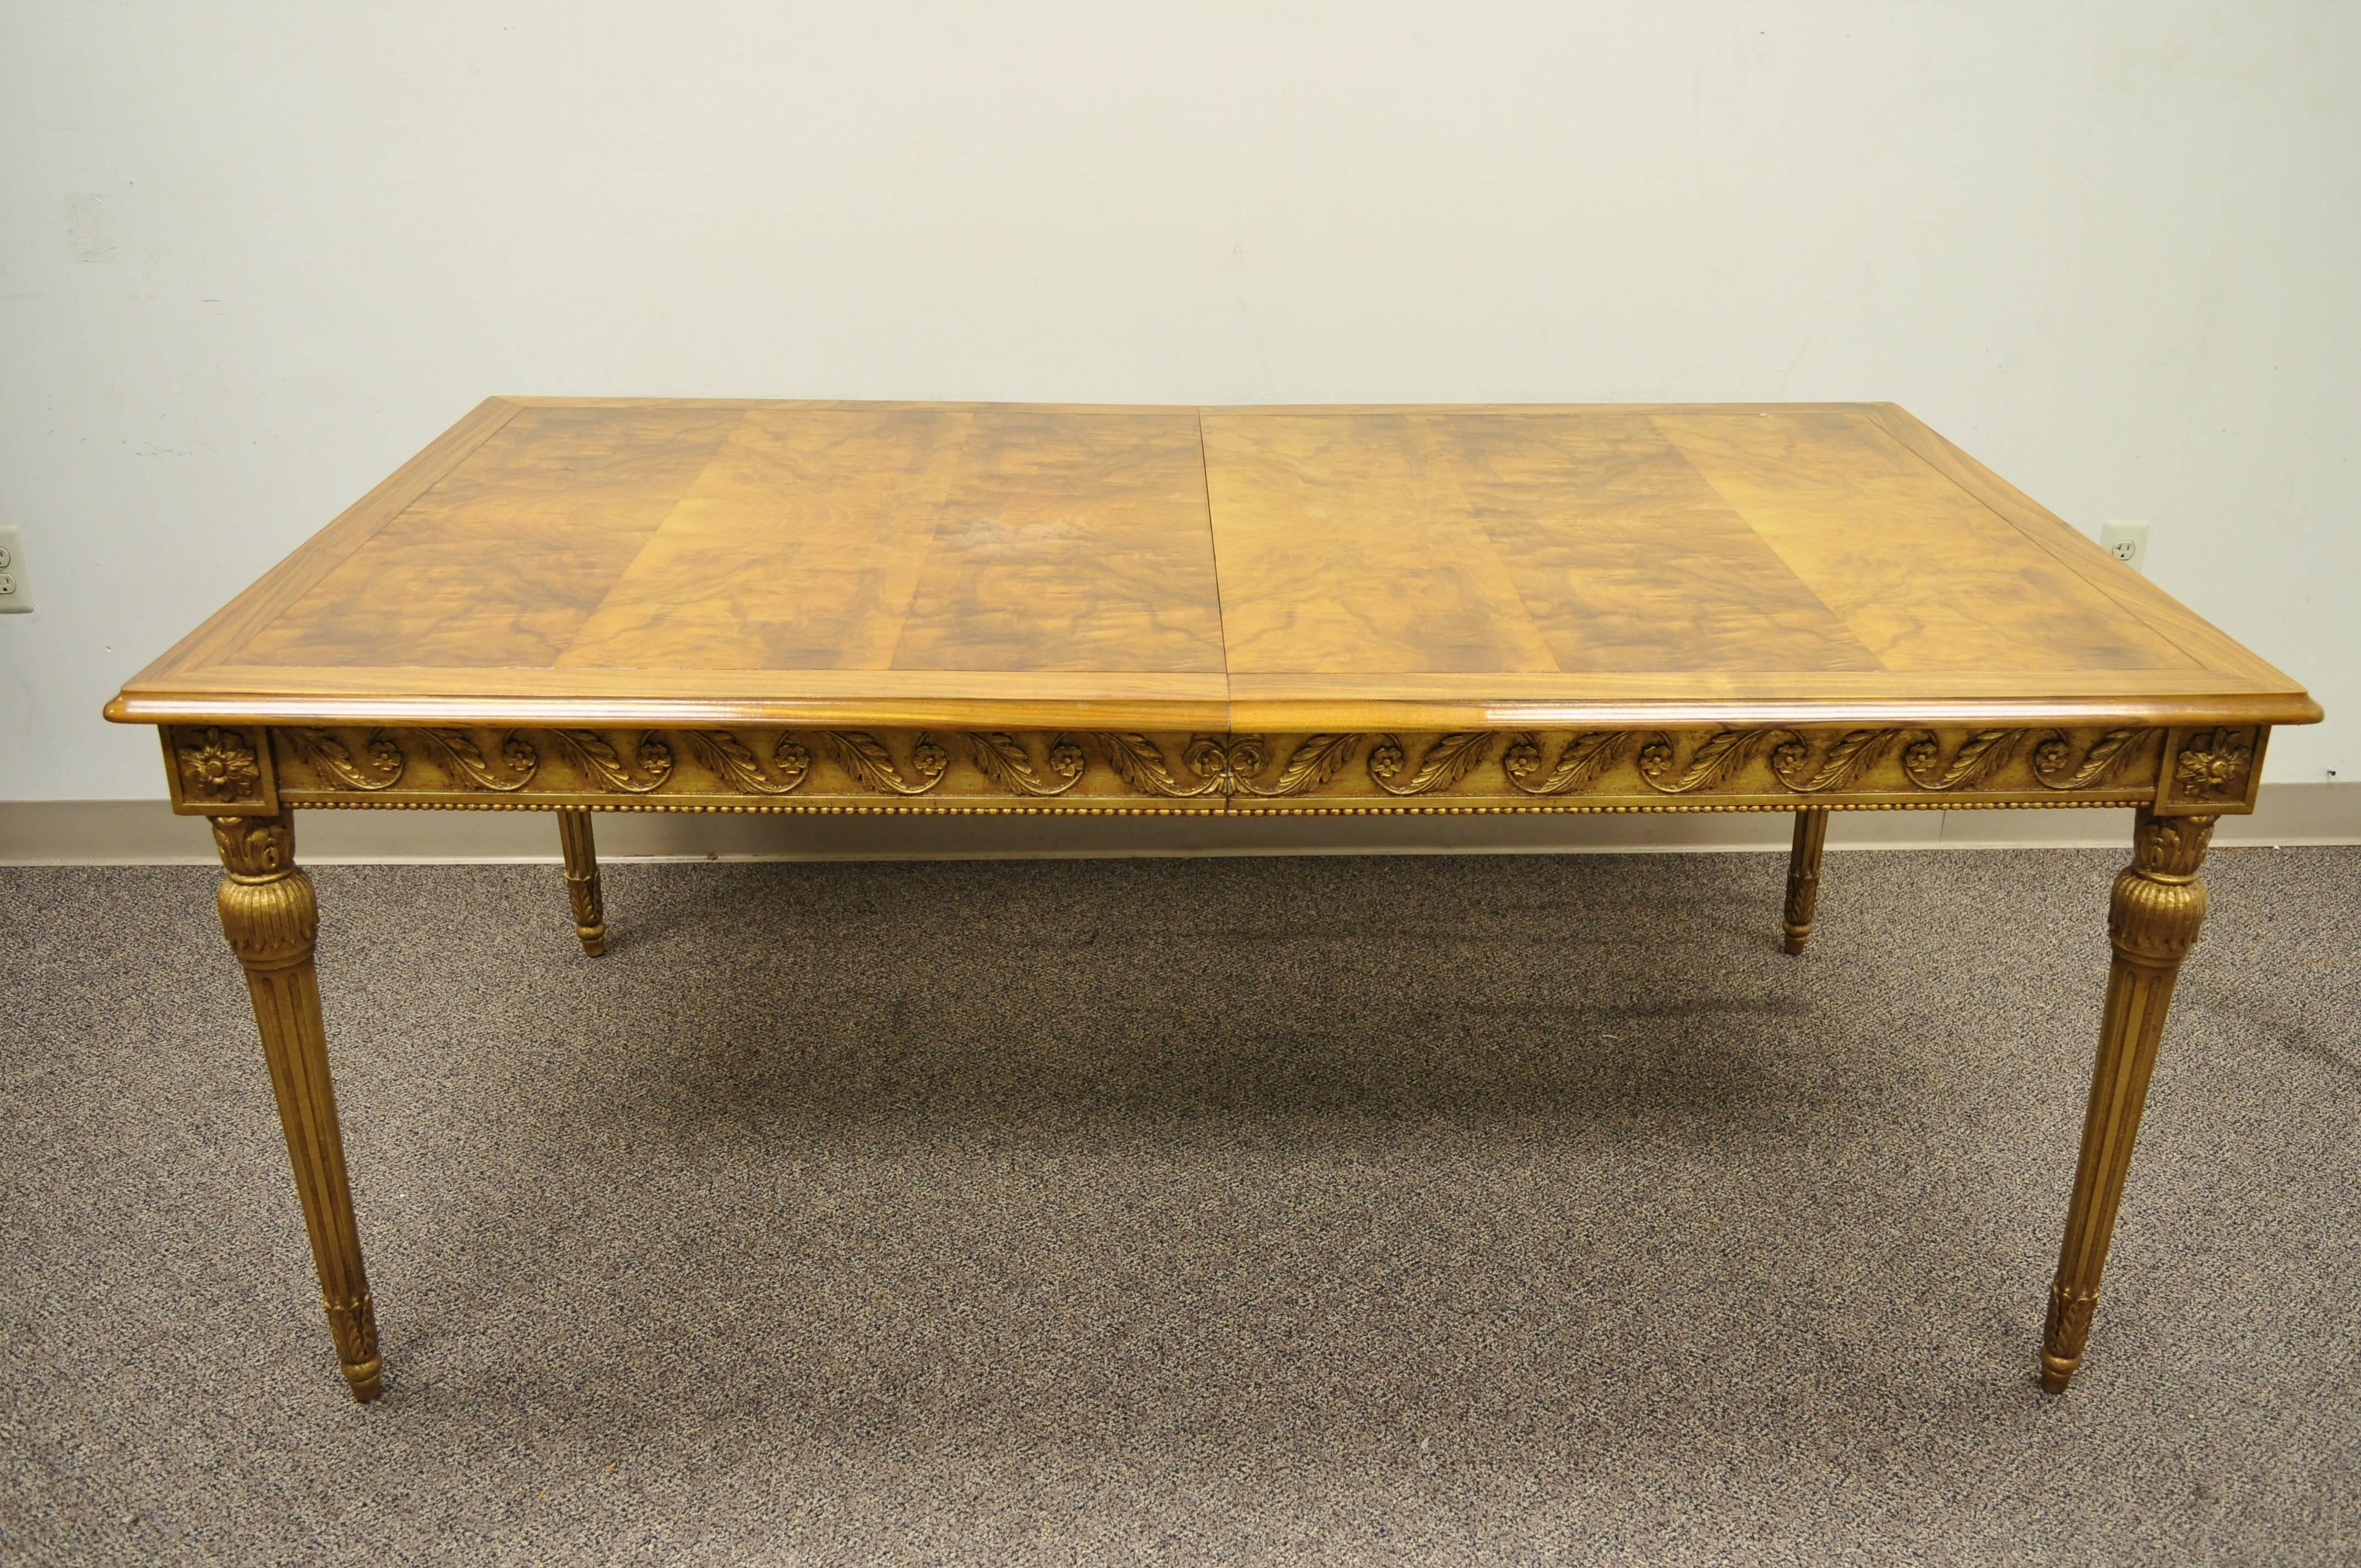 French Louis XVI / Italian neoclassical style burl walnut gold giltwood rectangular dining table. Item features (2) 12